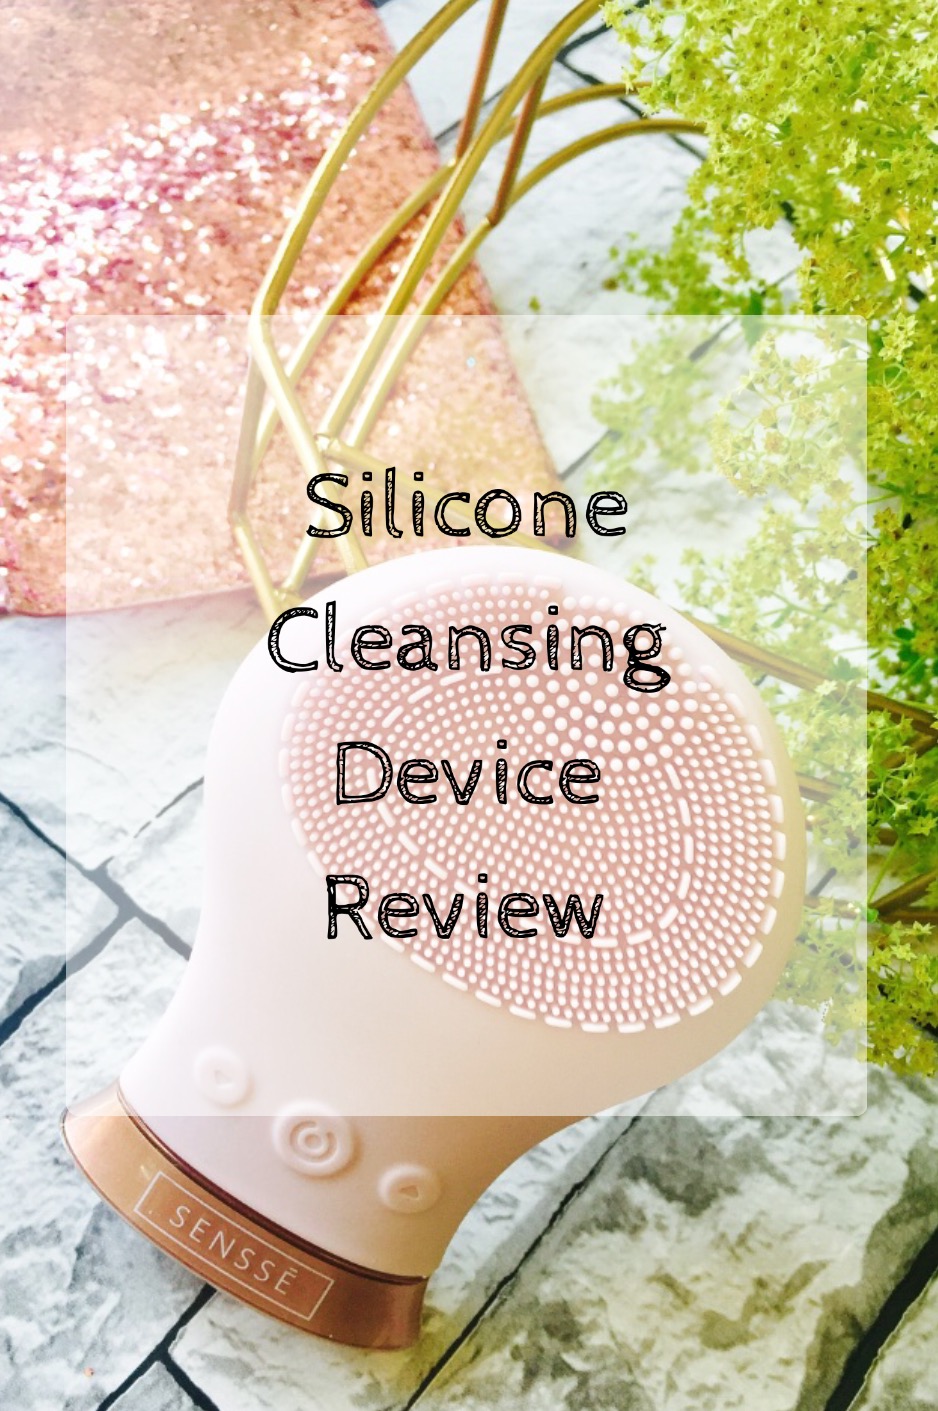 Sensse silicone cleansing device